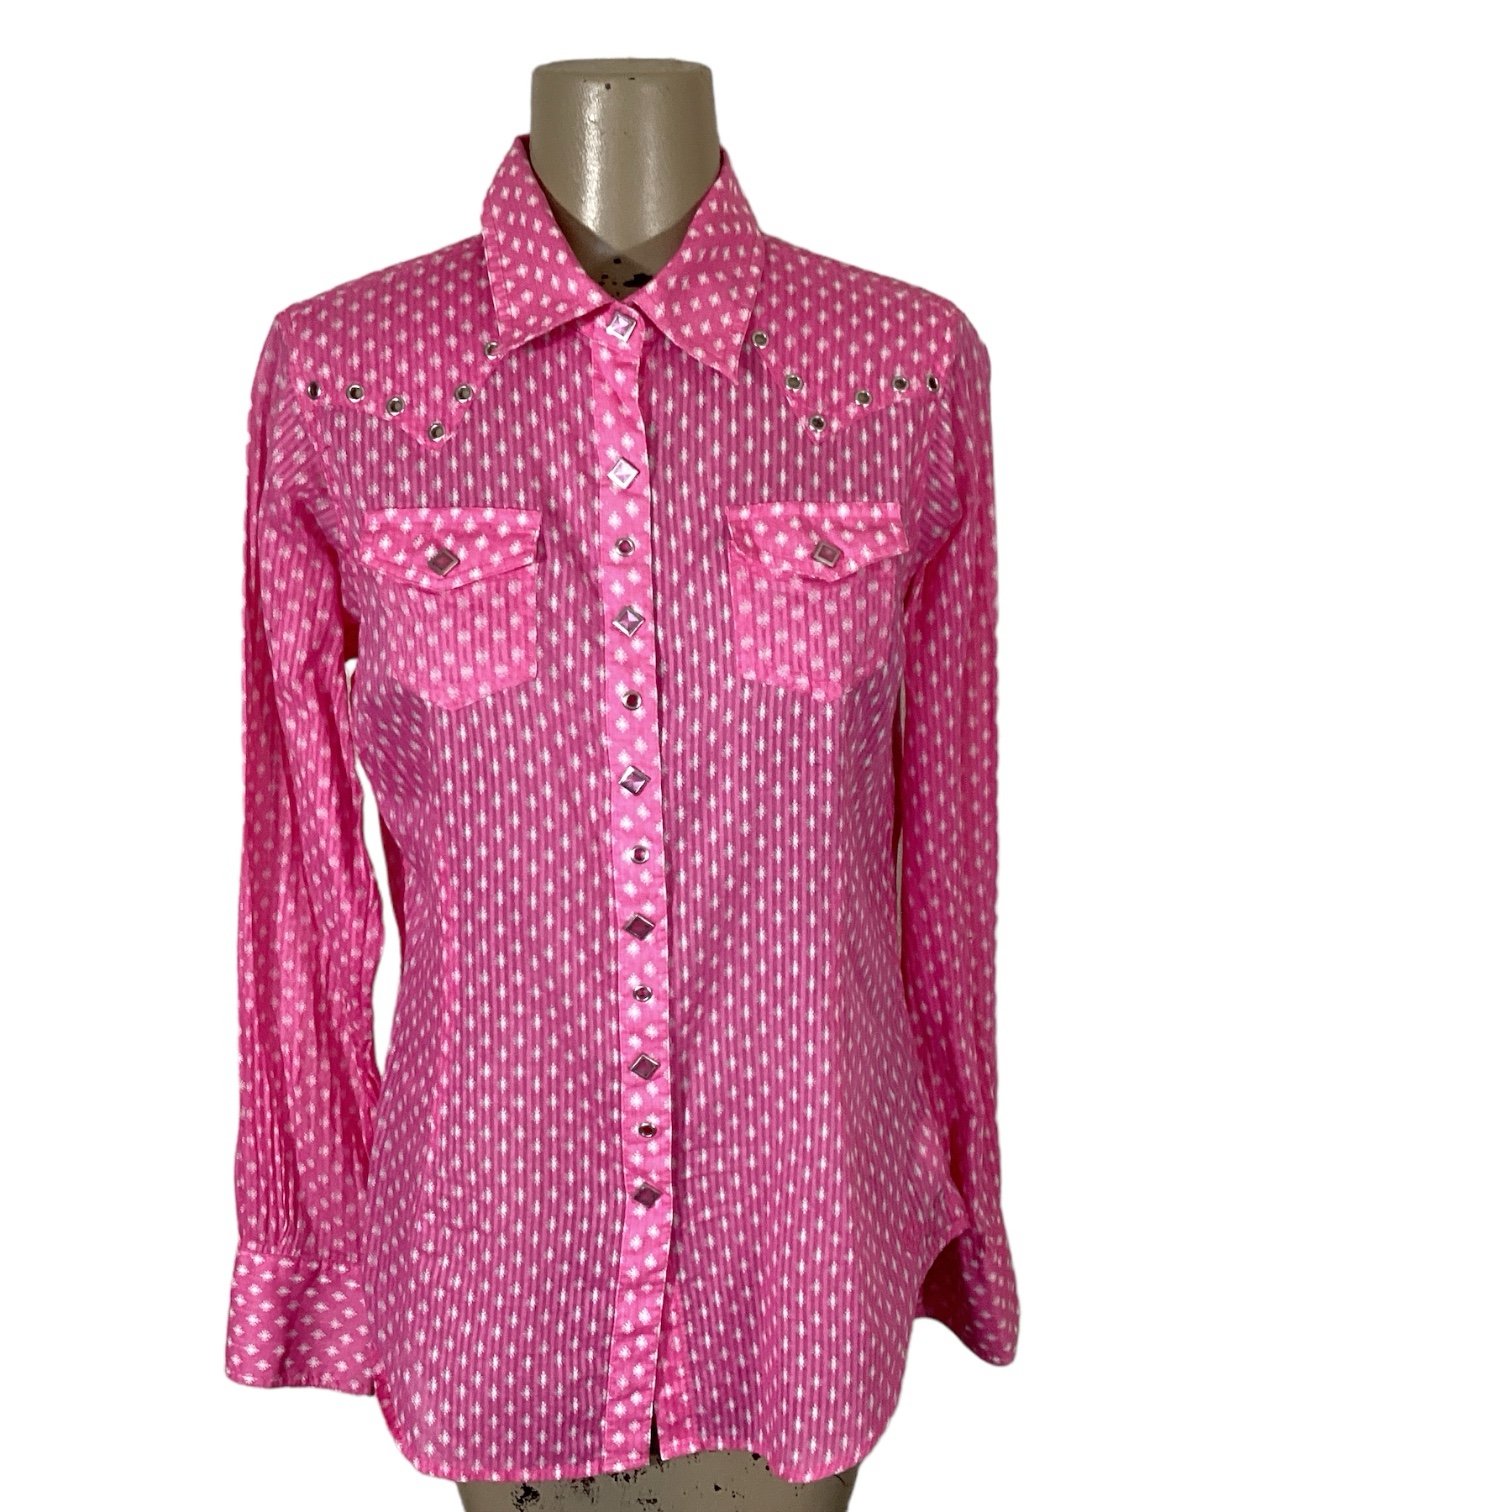 the Lowest price Ariat Pink Pearl Snap Western Rodeo Cowgirl All Over Print Sz M kT9Kb5ppo Fashion